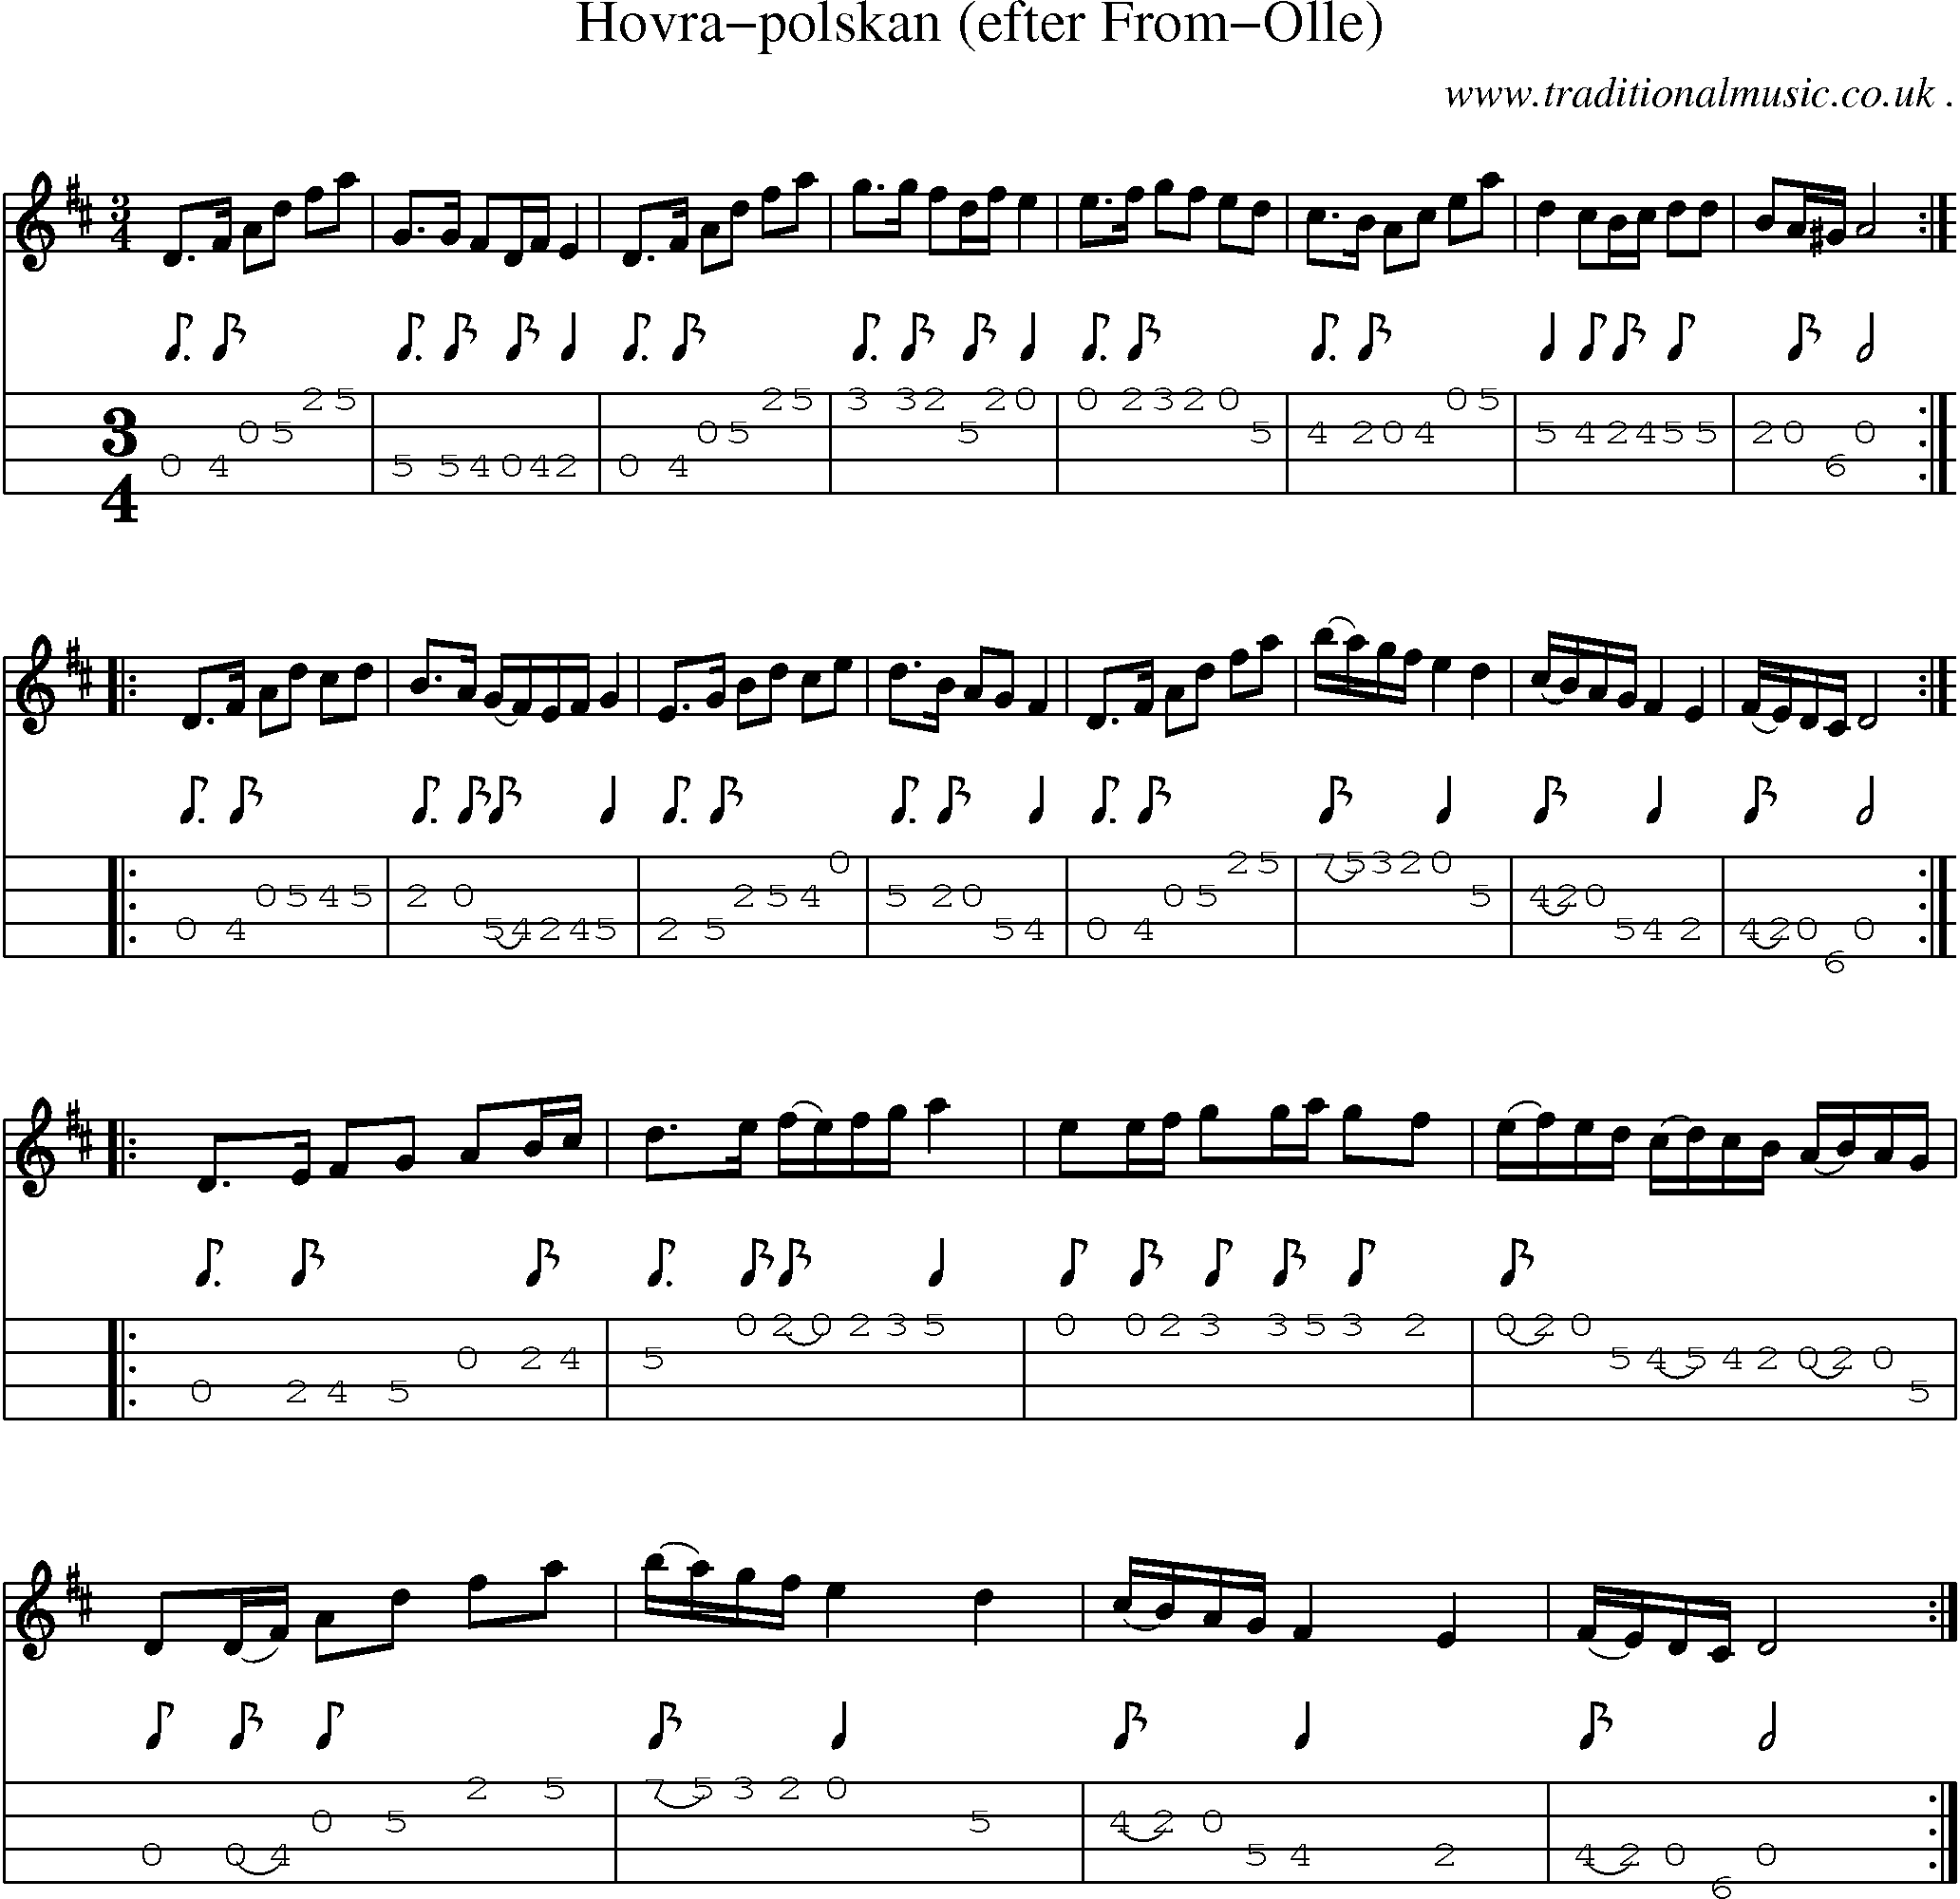 Sheet-Music and Mandolin Tabs for Hovra-polskan (efter From-olle)